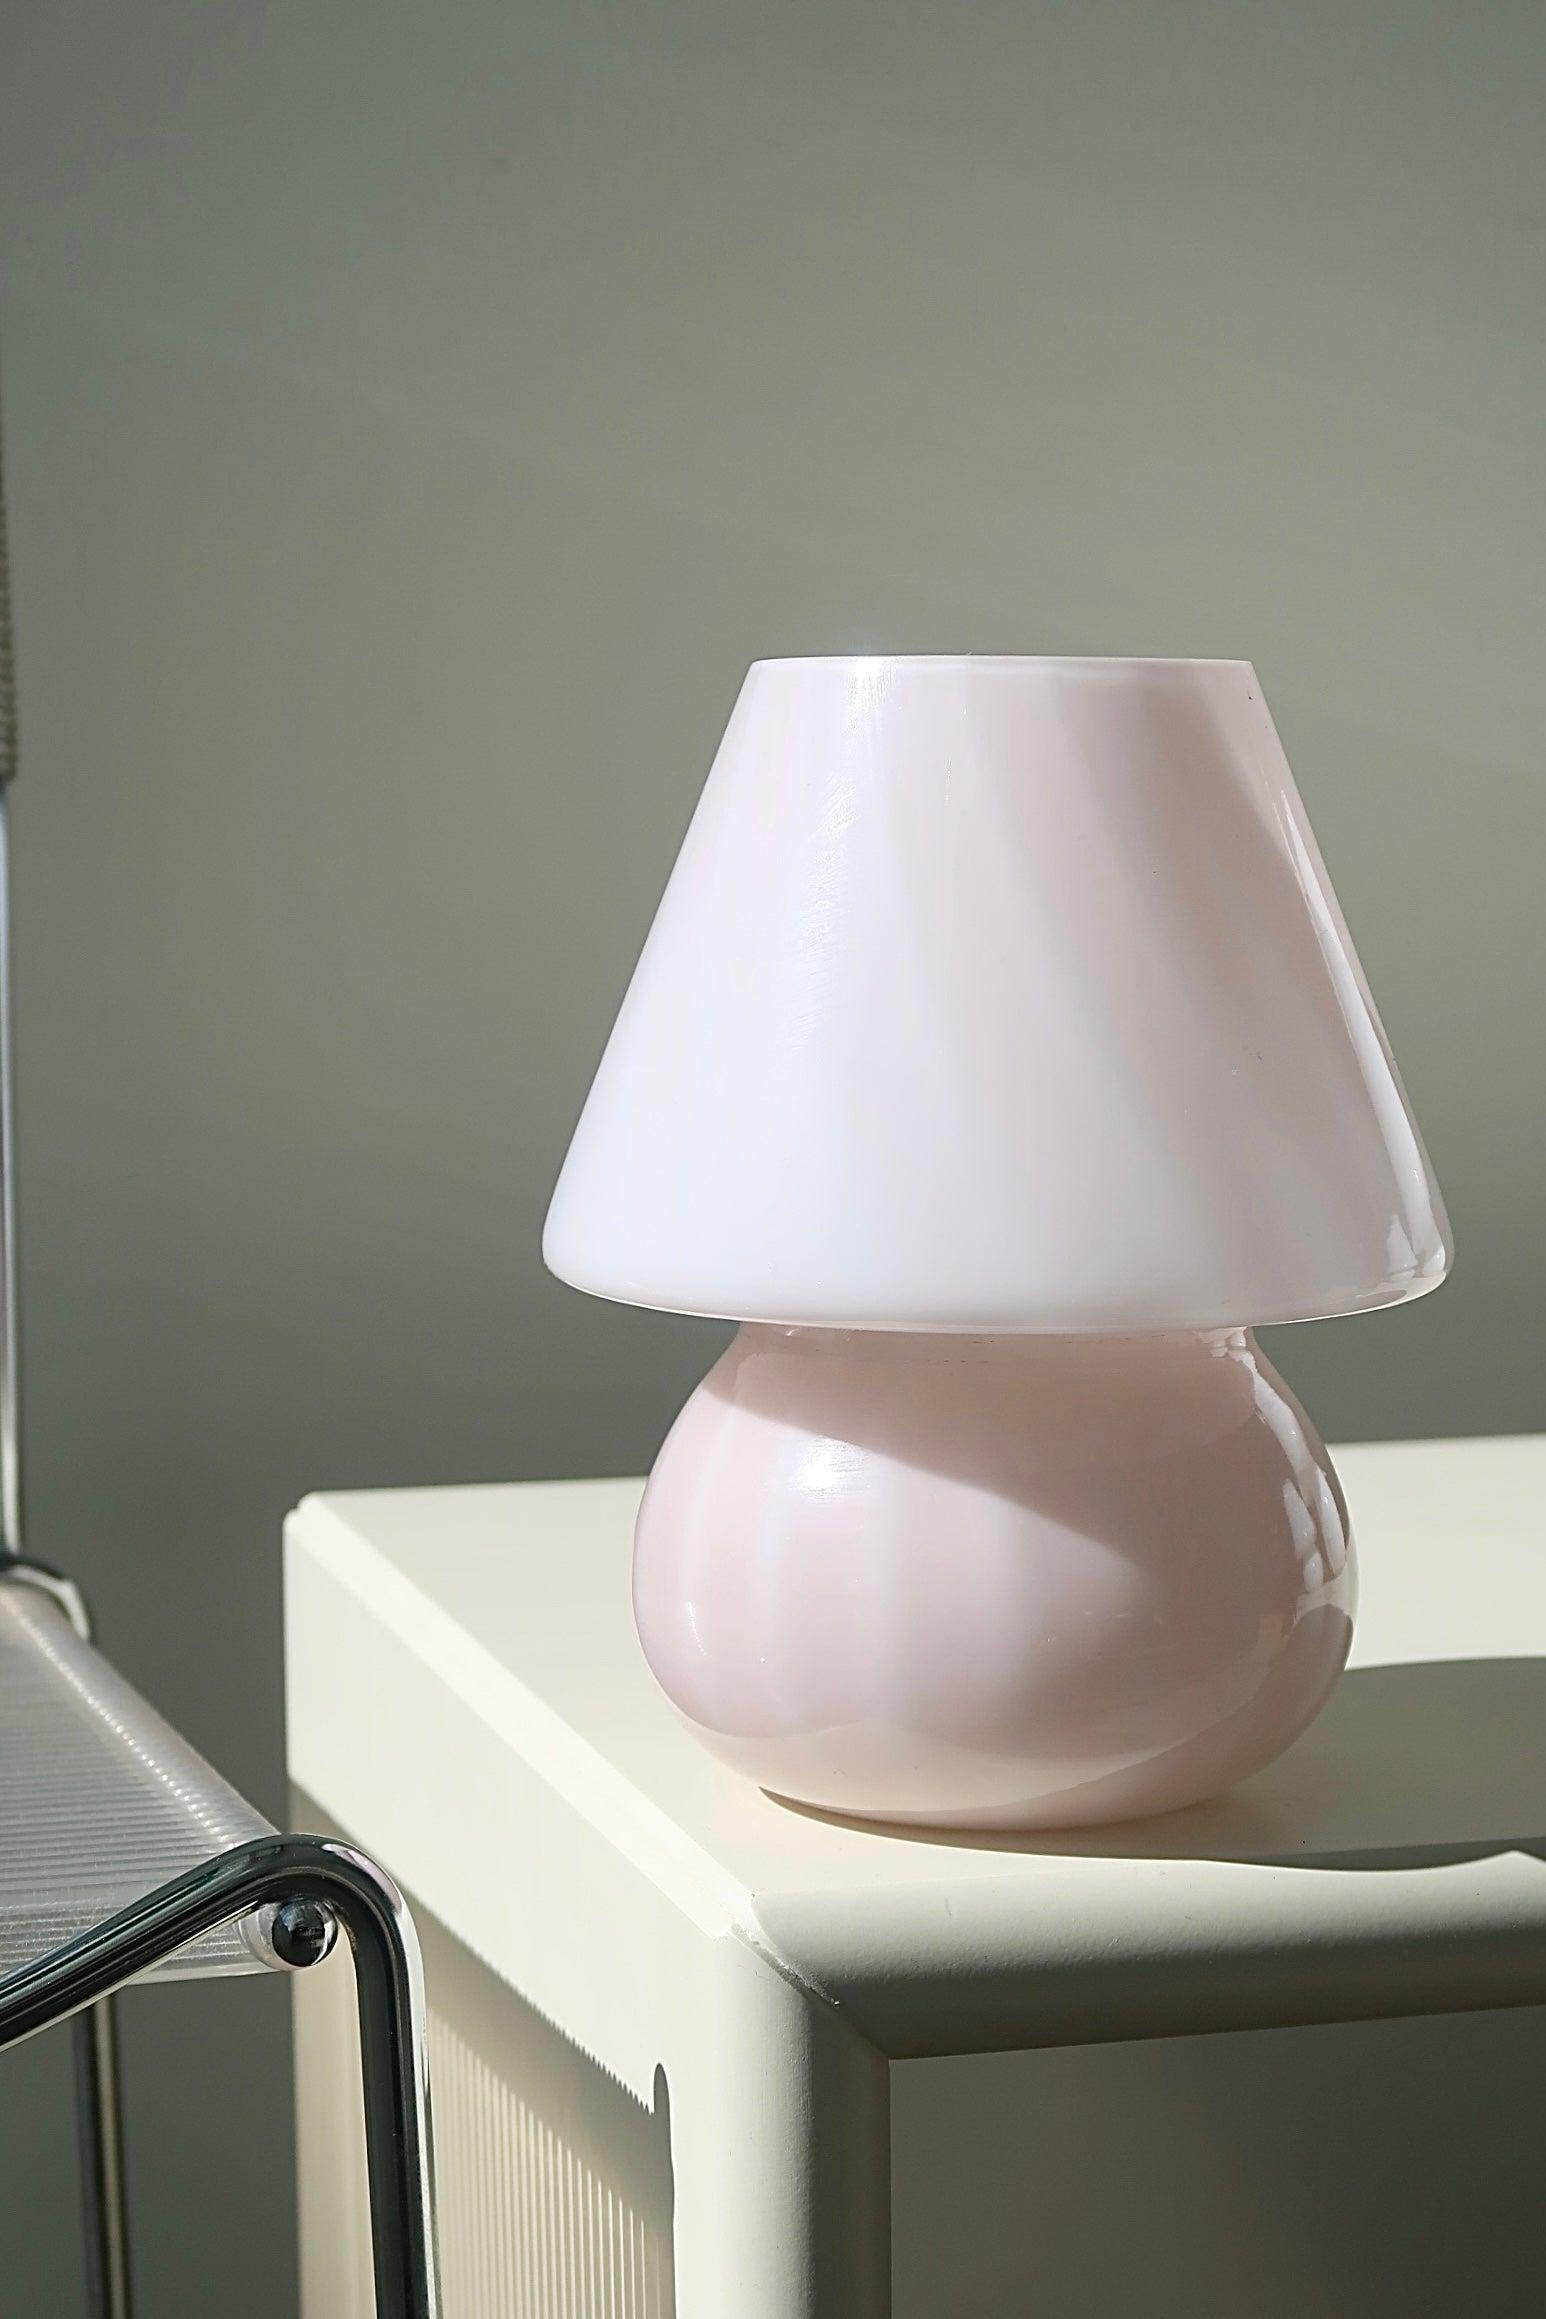 Vintage Murano baby mushroom table lamp. Mouth-blown lamp in pink / pink glass with swirl. The perfect Size for a bedside table. Handmade in Italy, 1970s, and comes with new white cord.

H:20cm D:15cm. 


